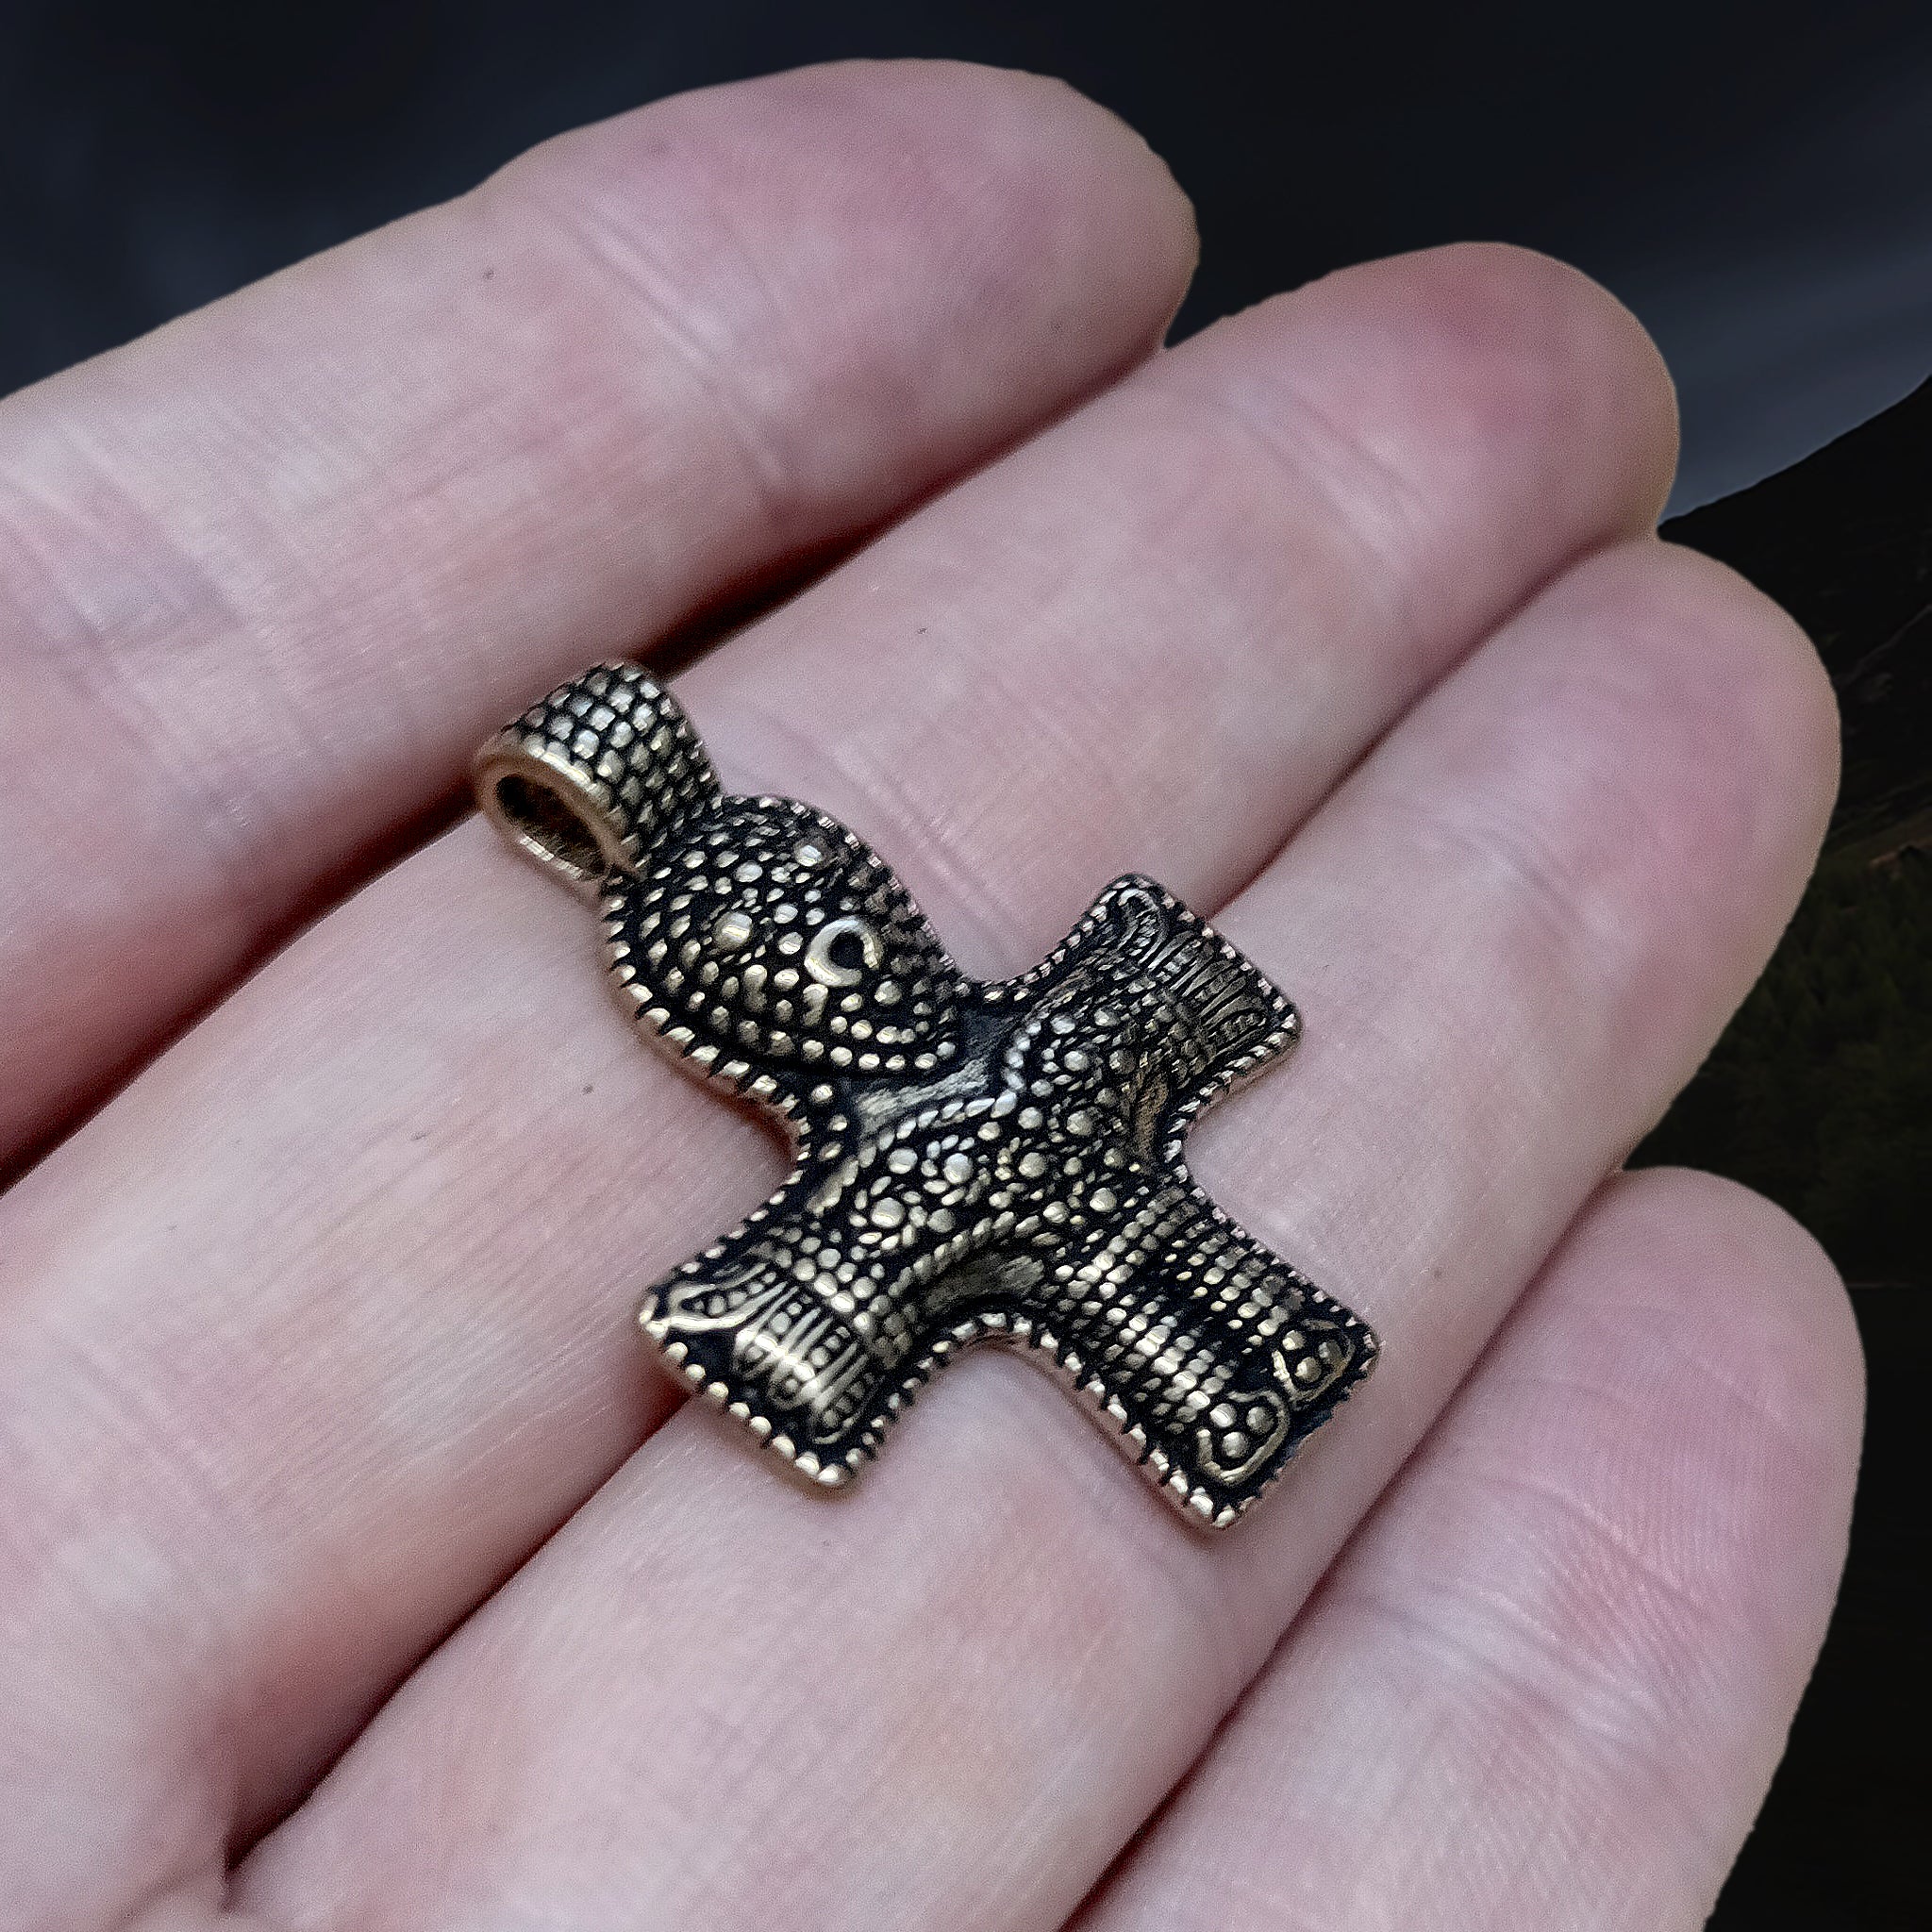 Bronze Crucifix Pendant from Denmark on Hand - Angle View - Viking Jewelry